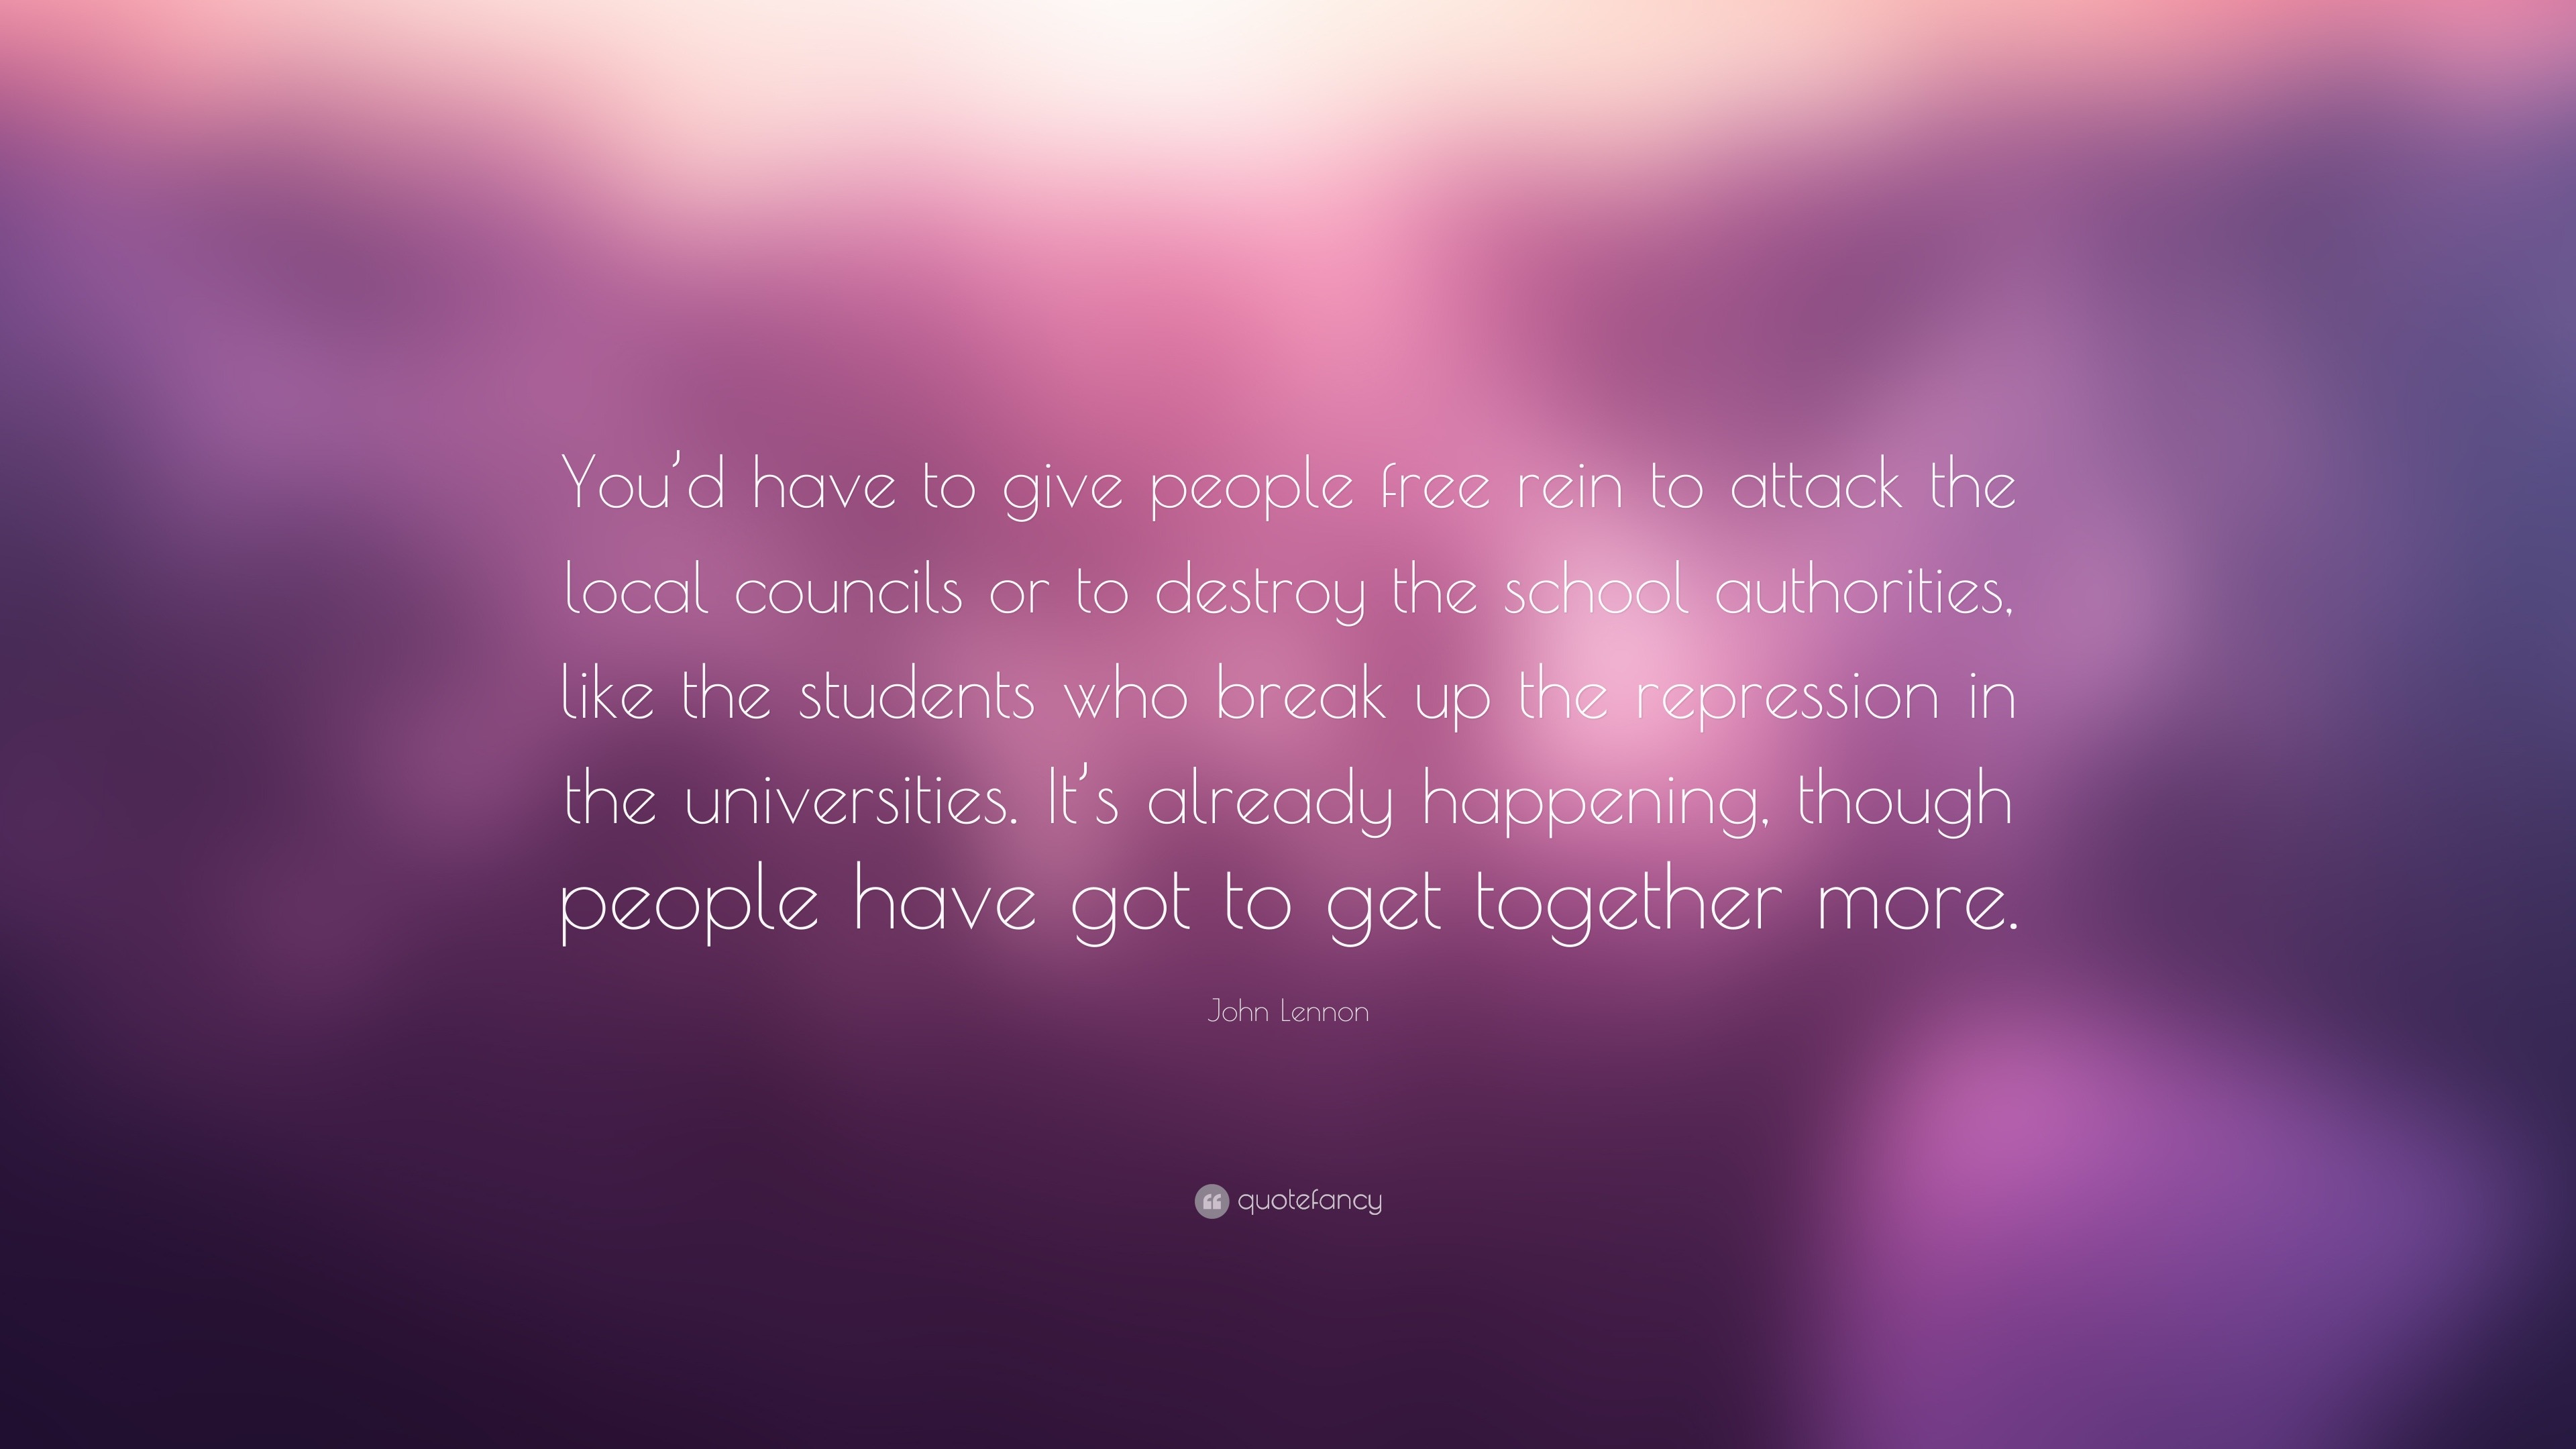 John Lennon Quote: “You’d have to give people free rein to attack the ...